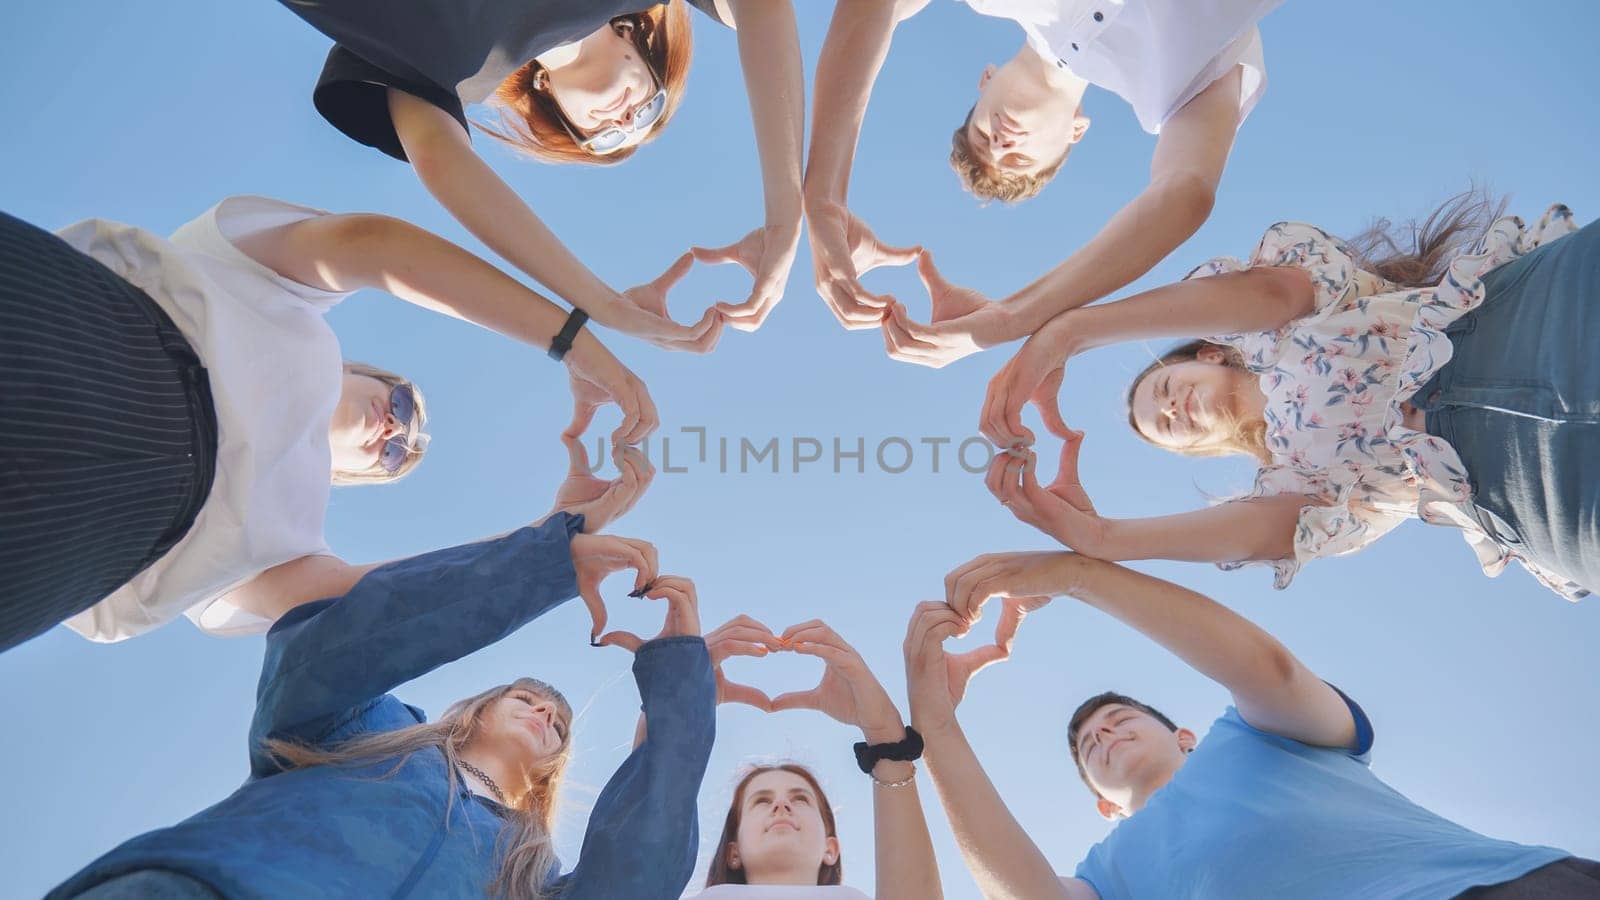 Group of seven people together doing an heart with their fingers and hands - people in cricle having fun and playing - ground view